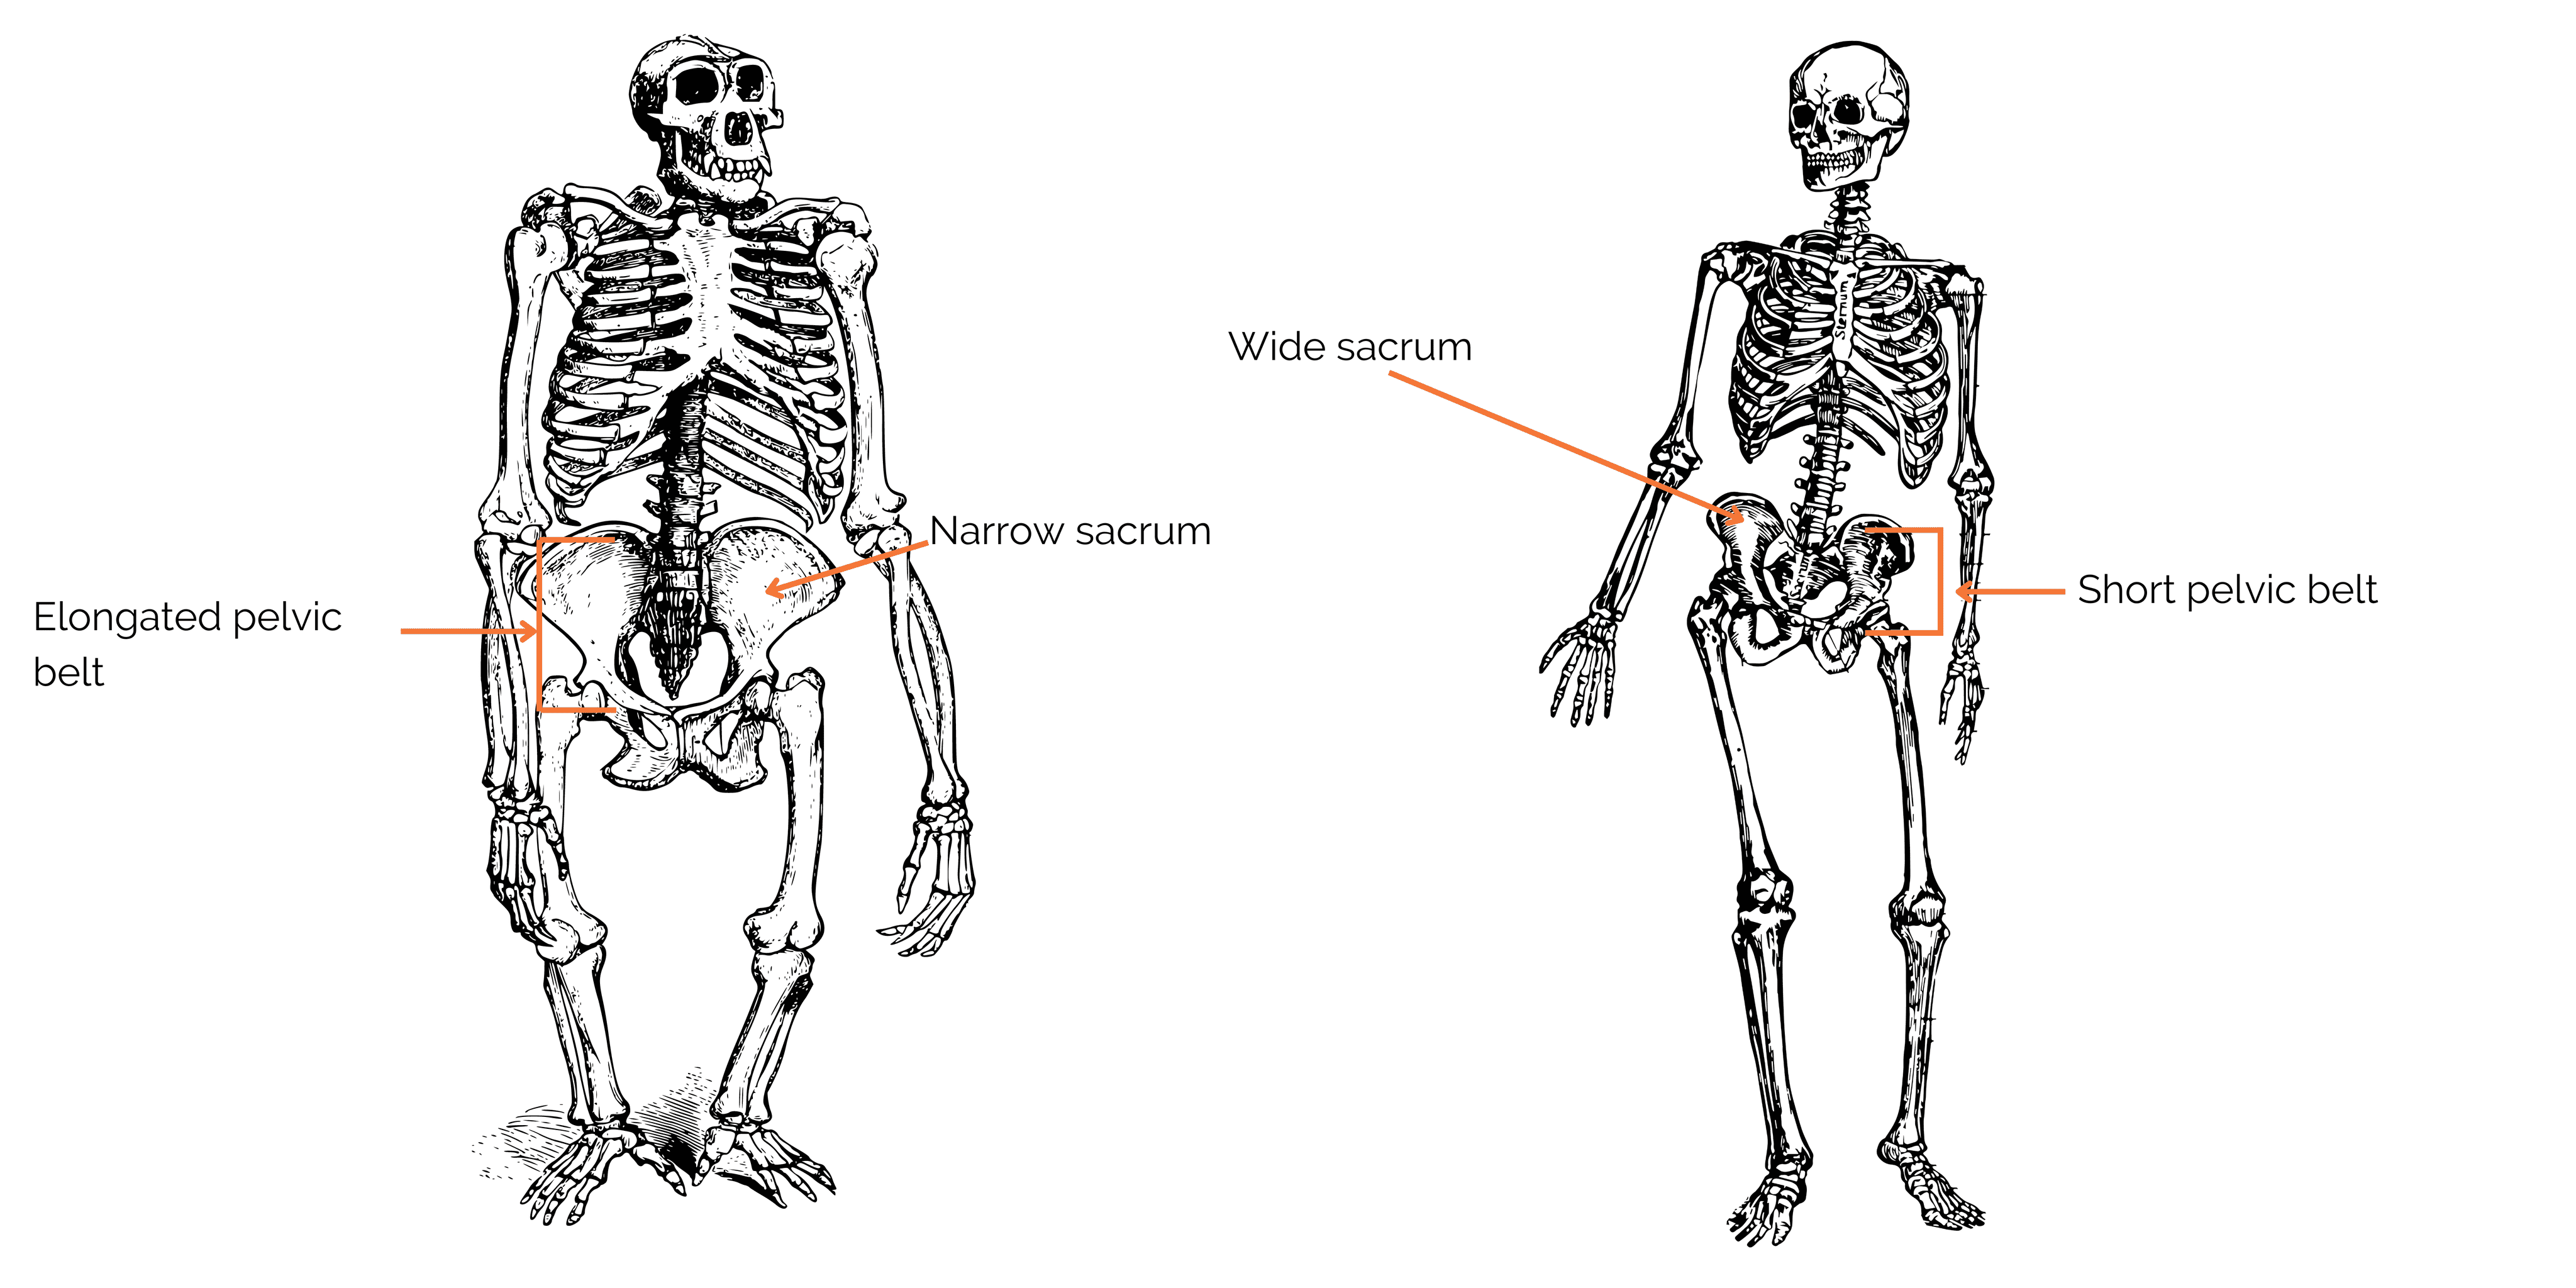 Comparaison between the pelvis of a chimpanzee and human 